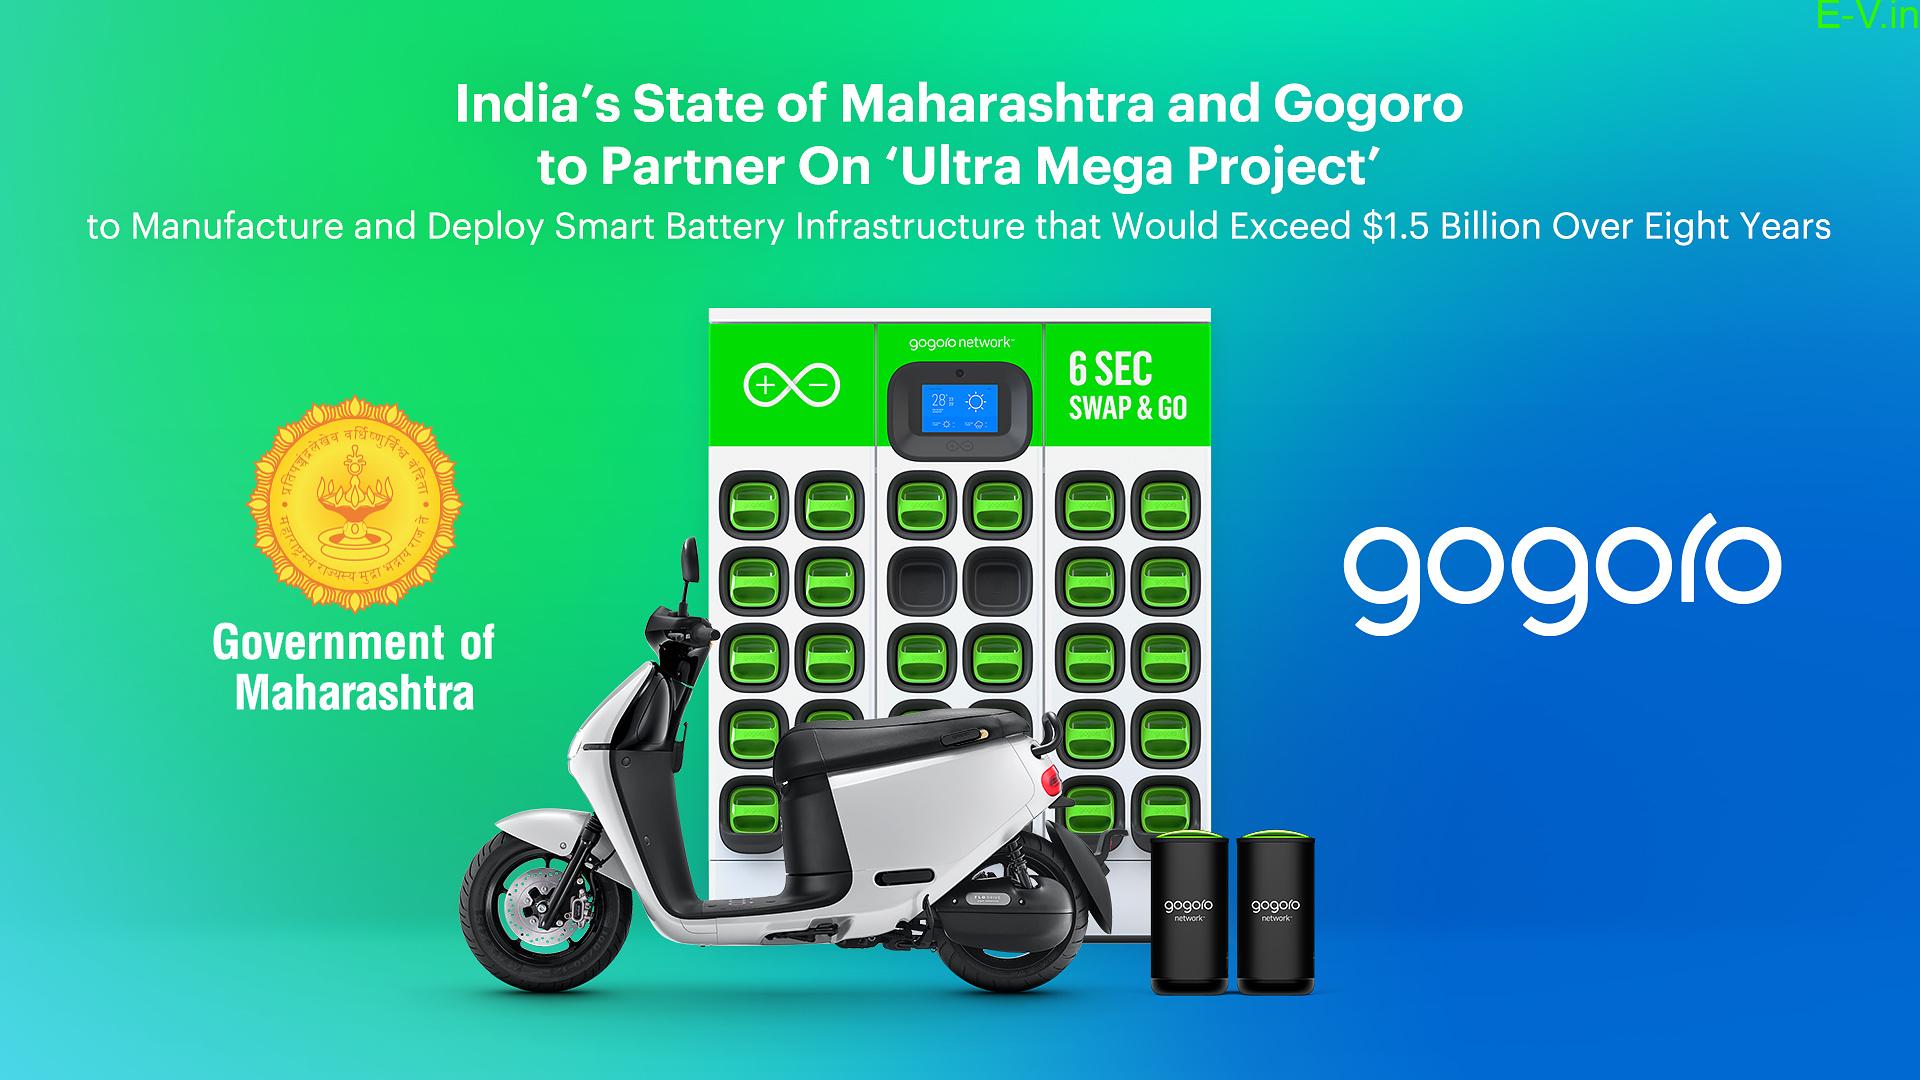 Gogoro to Invest $1.5 Billion in Indian Smart Battery Infrastructure